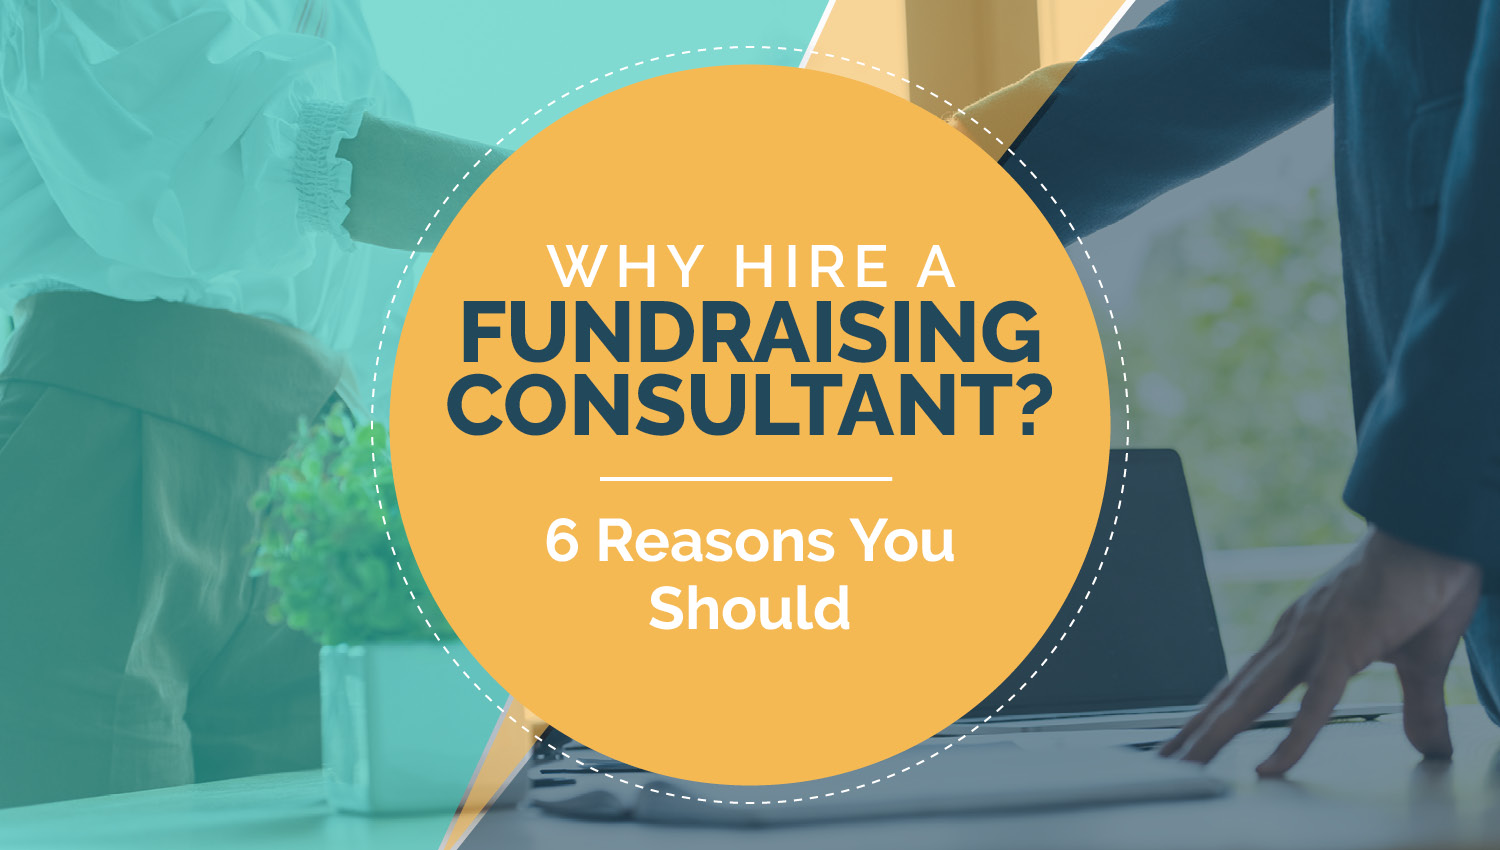 Read our guide to learn more about when you should hire a fundraising consultant.